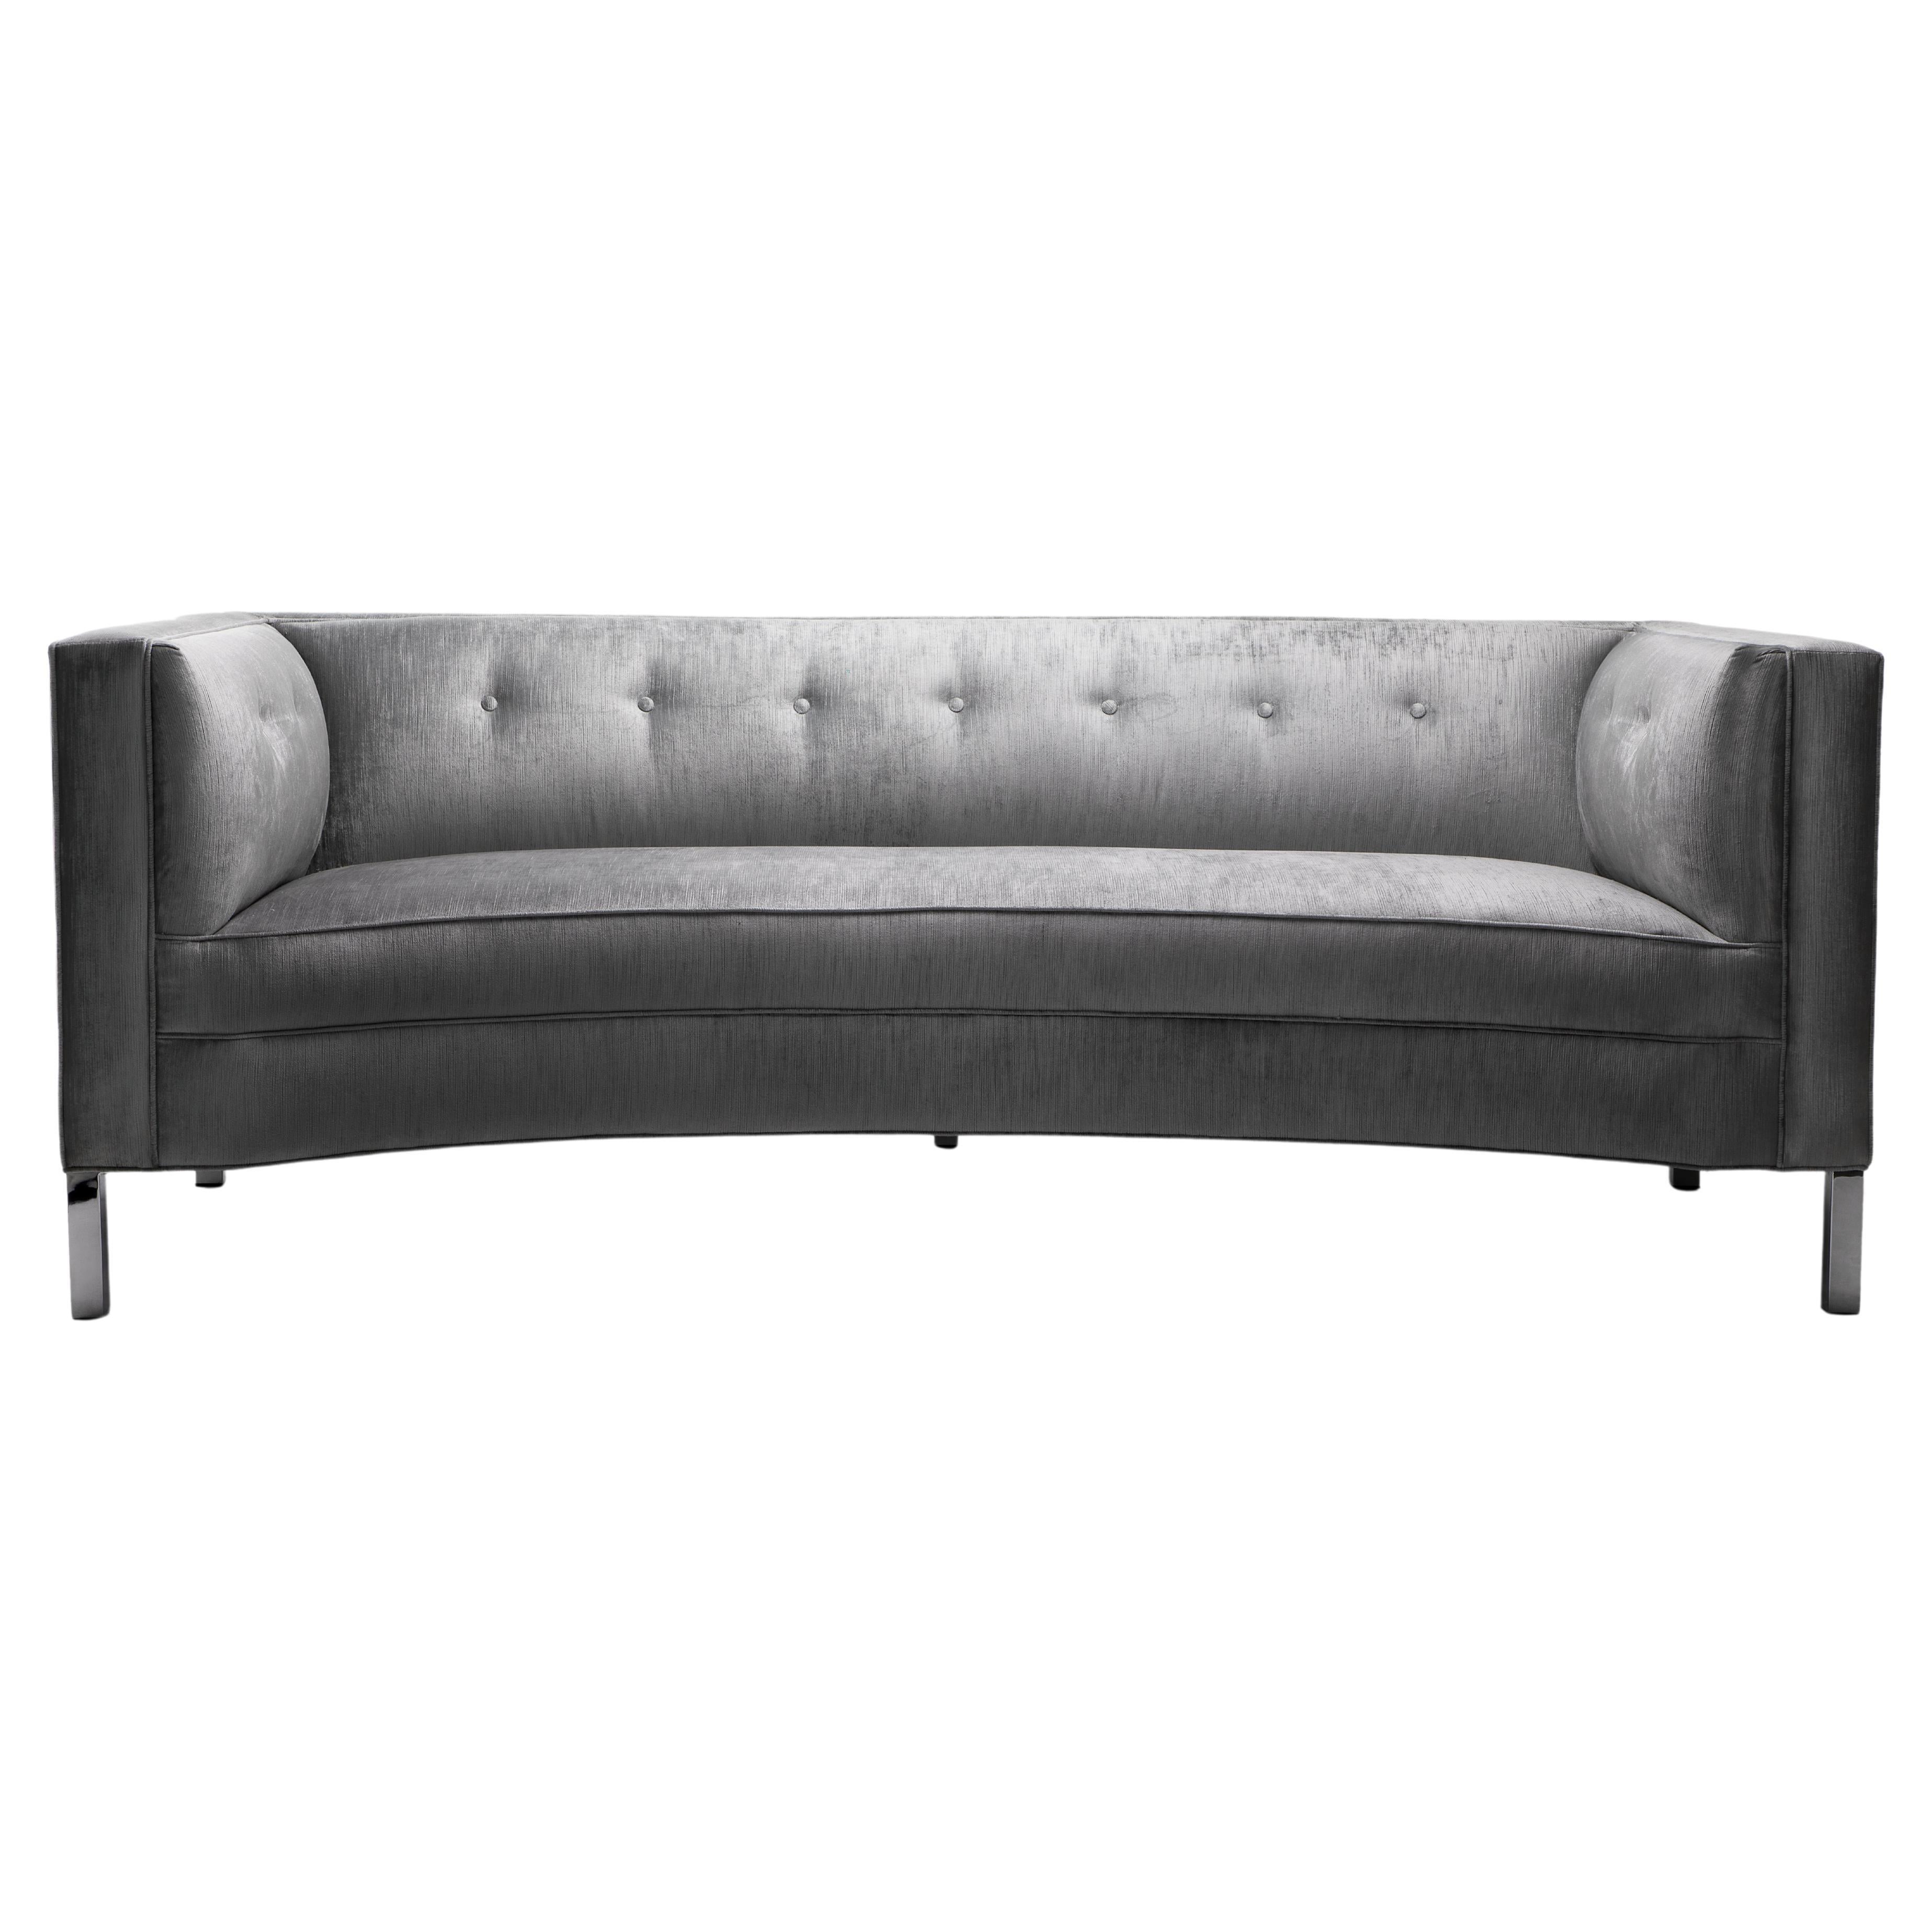 Contemporary Cellini Sofa Handcrafted by James by Jimmy Delaurentis